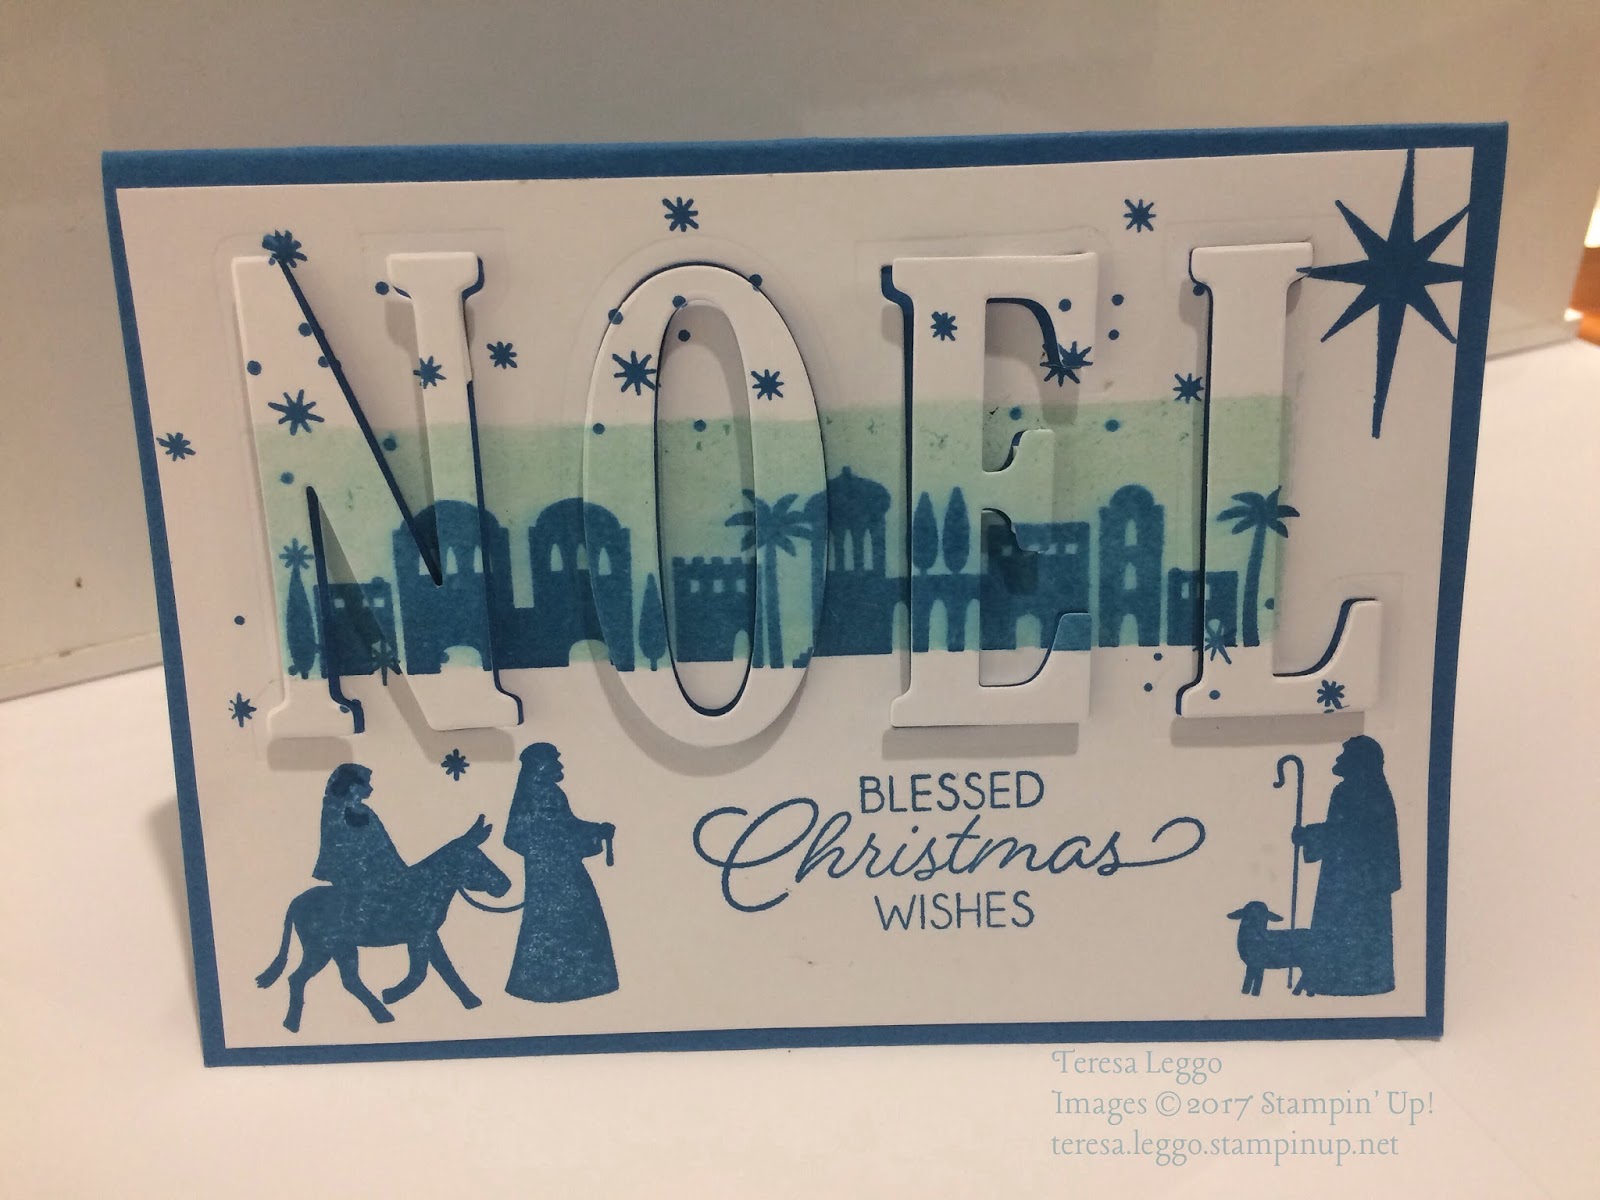 Teresa's Creative Cards: Night in Bethlehem meets Eclipse Technique